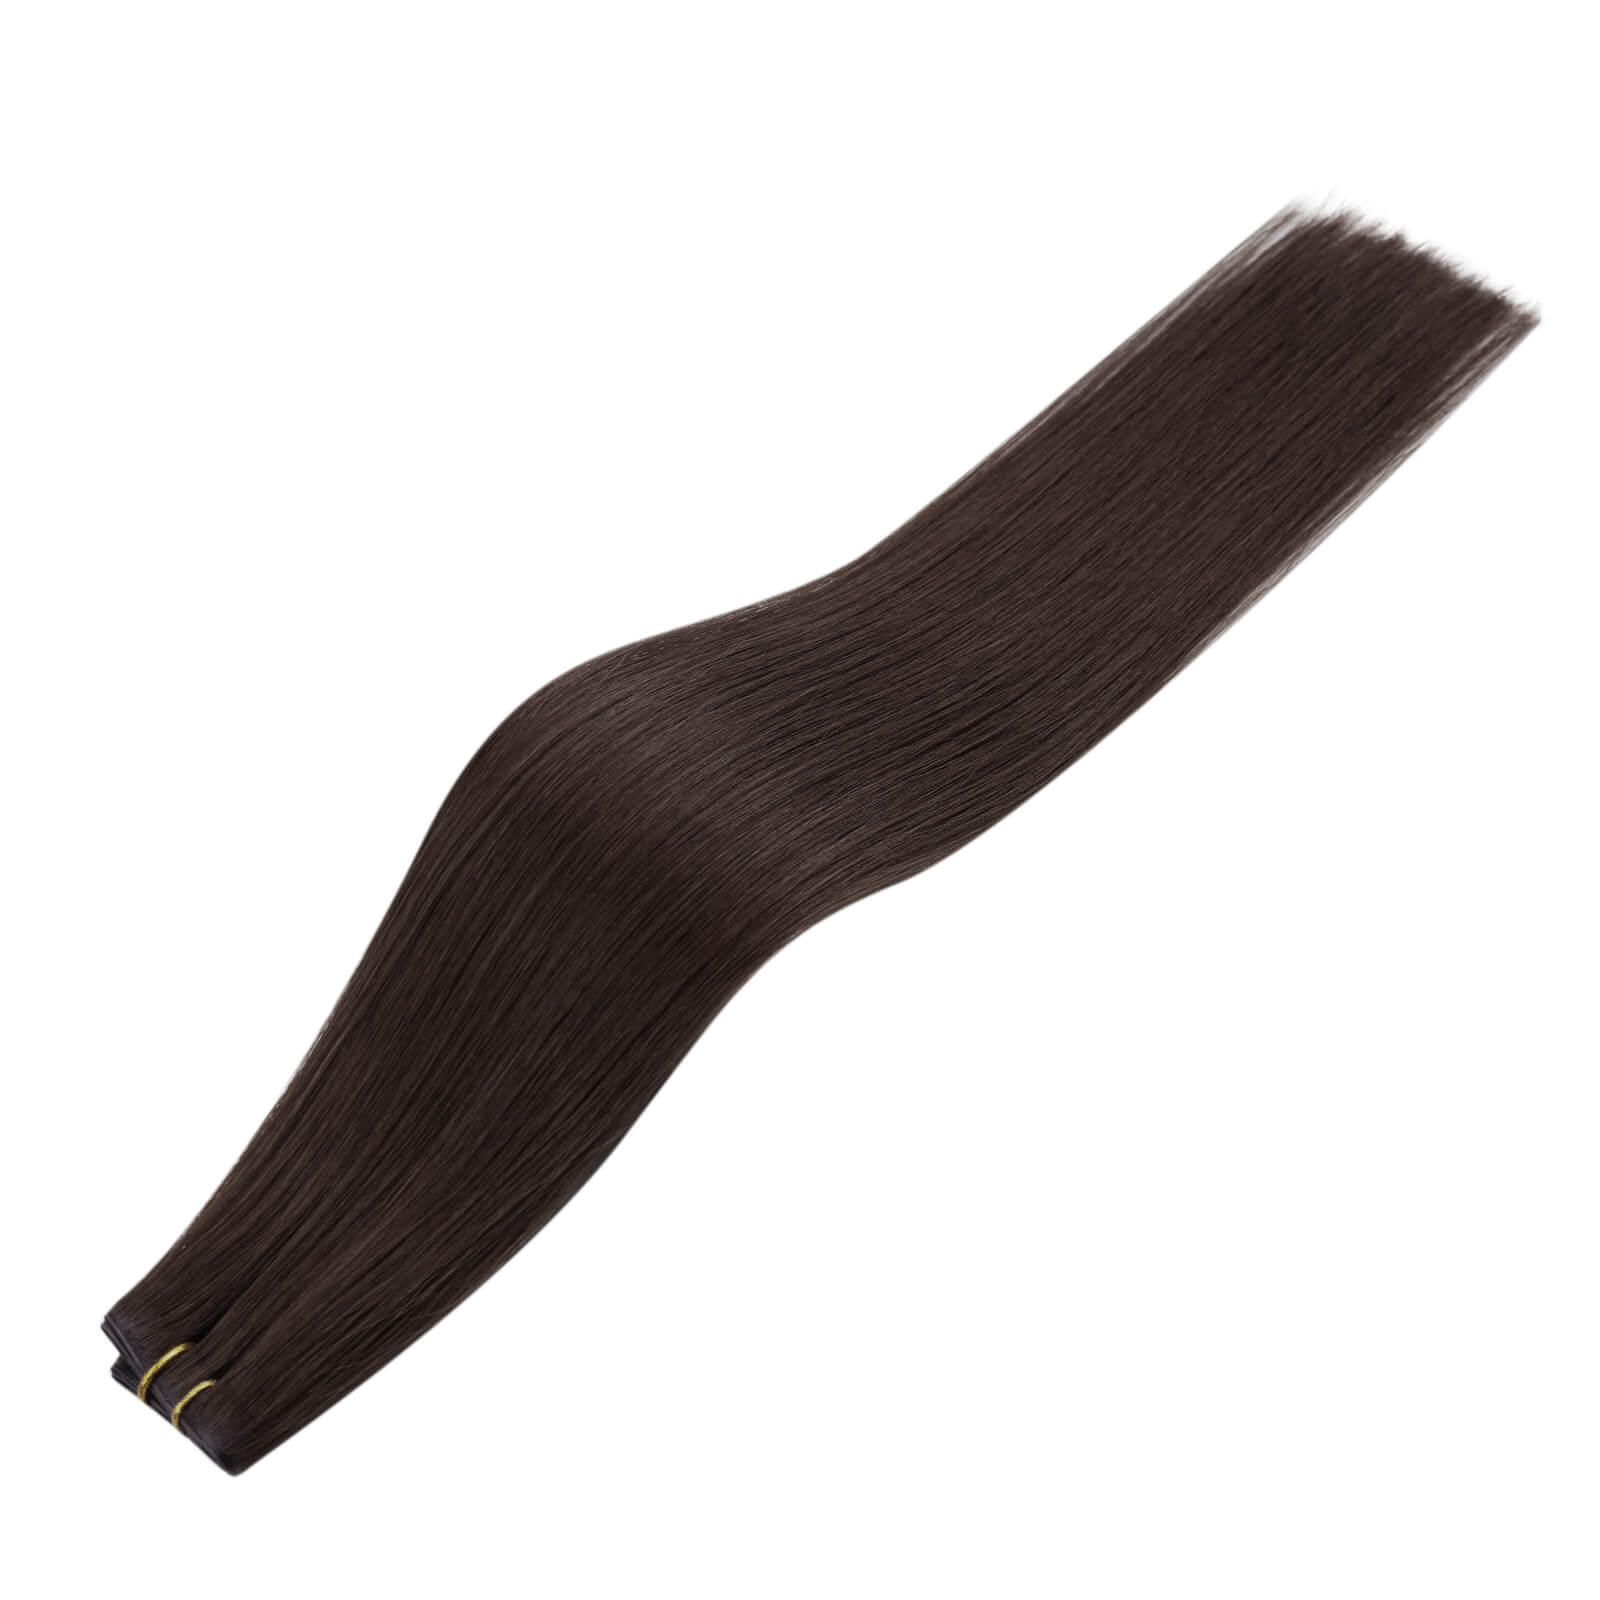 sunny hair,best hair extensions,brown hair extensions,ral human hair extensions,sew in weft hair extensions